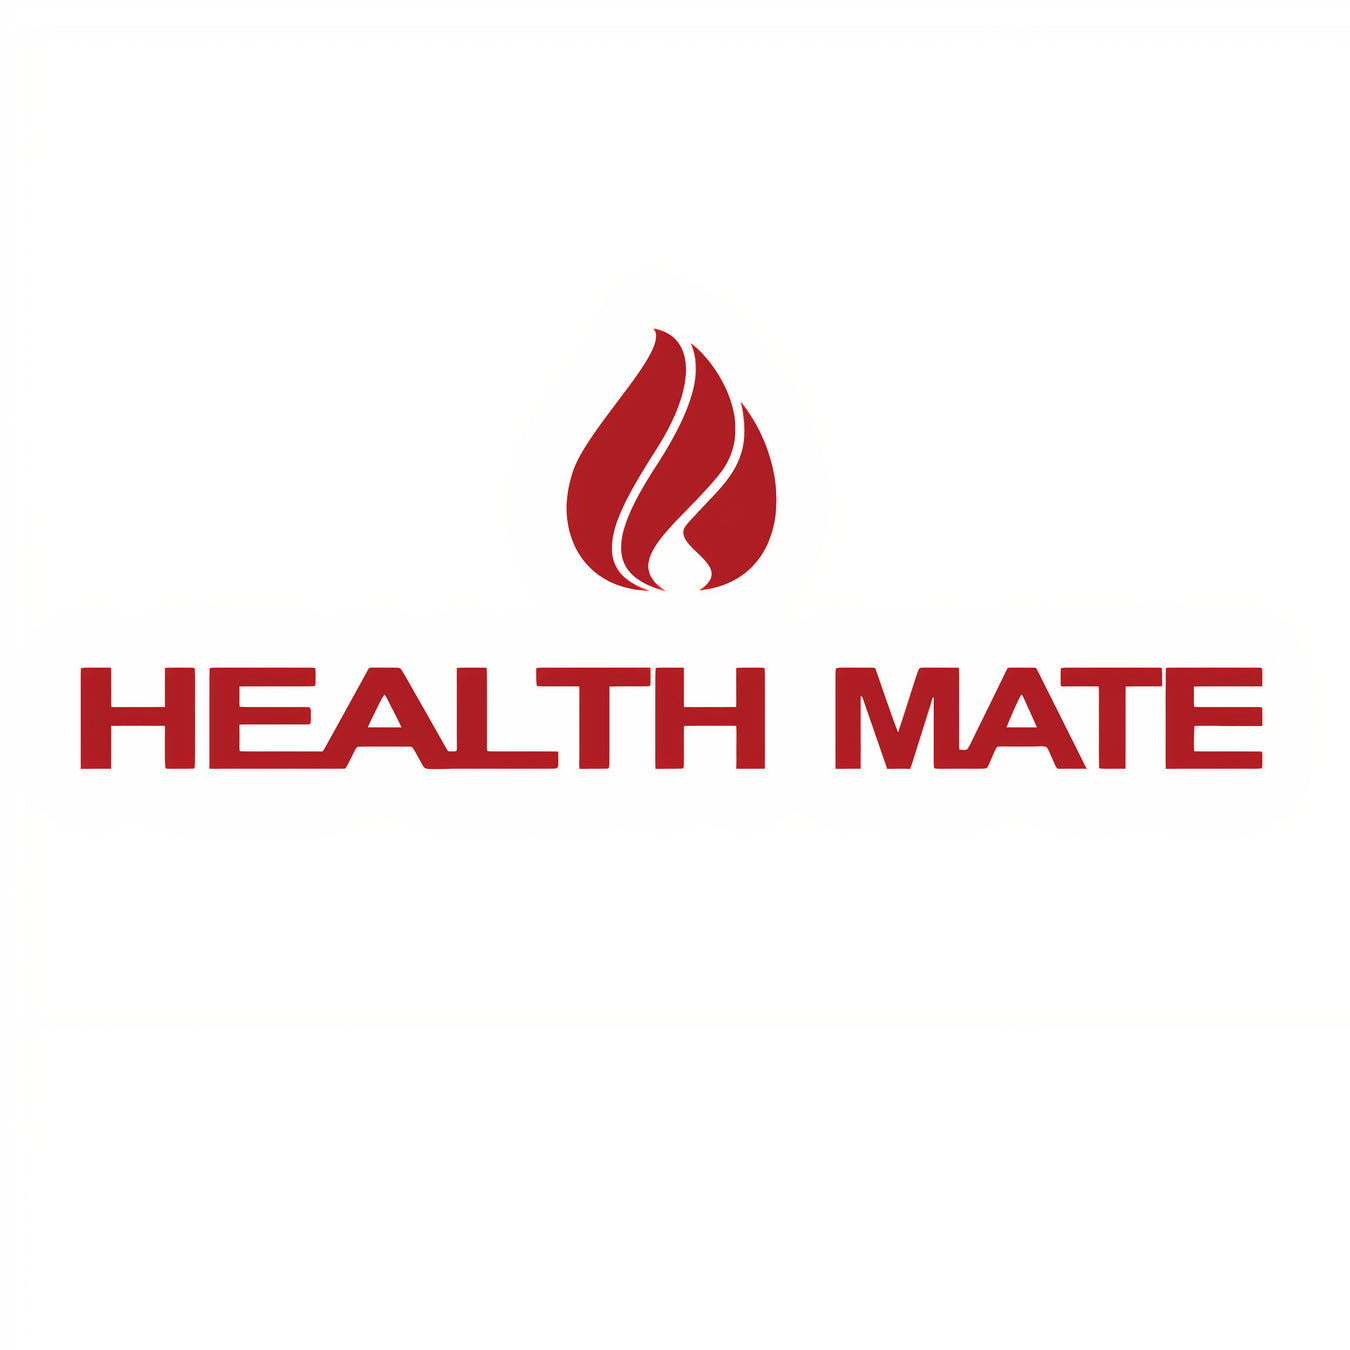 A Health Mate logo for the sauna brand. It is red in colour and has a flame showing the infrared and heat capabilities.